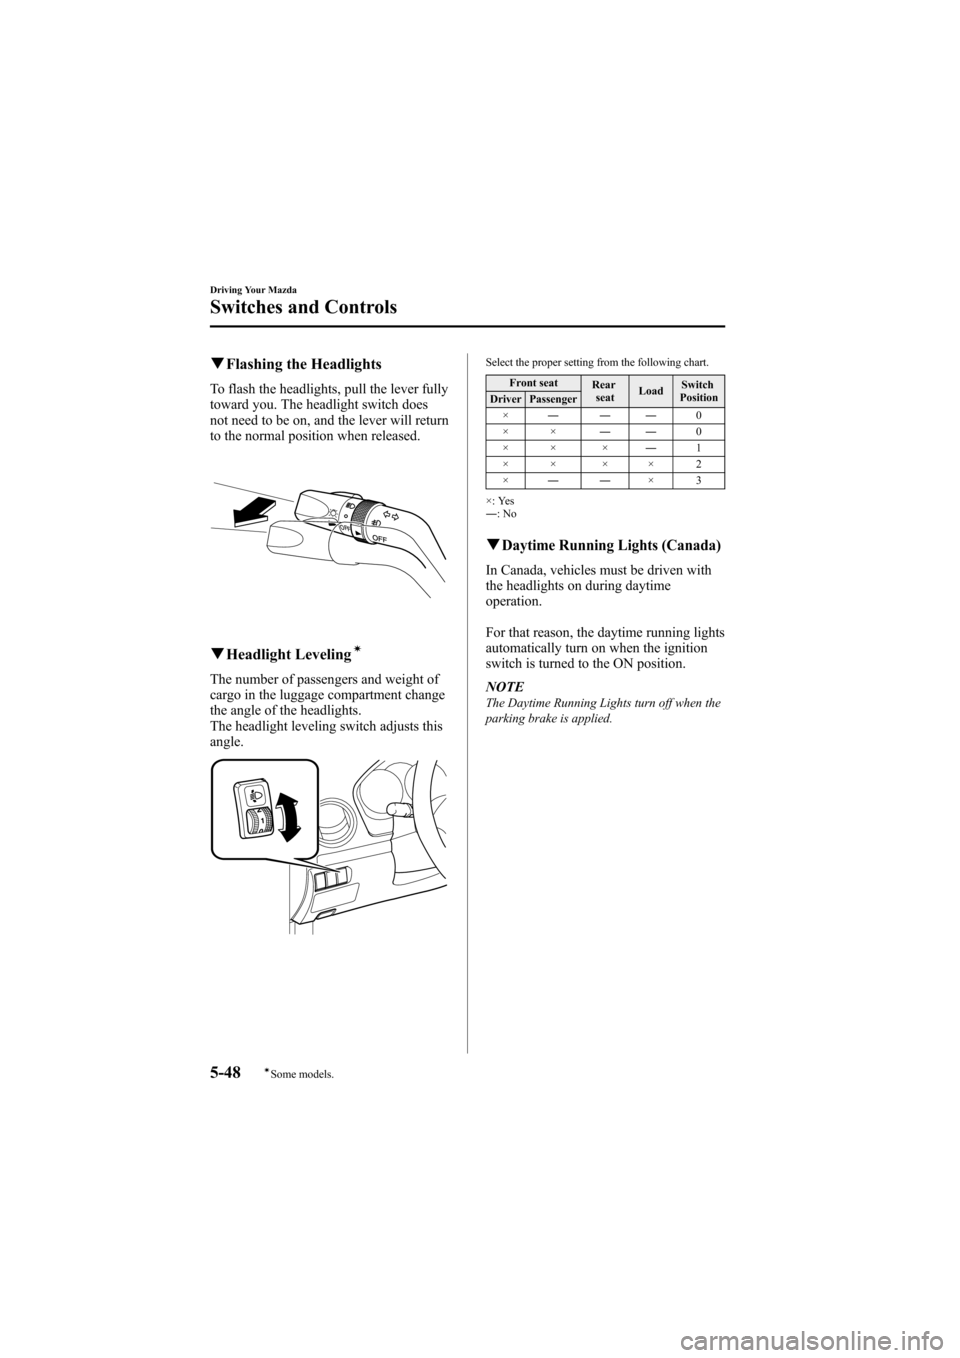 MAZDA MODEL 6 2008  Owners Manual (in English) Black plate (176,1)
qFlashing the Headlights
To flash the headlights, pull the lever fully
toward you. The headlight switch does
not need to be on, and the lever will return
to the normal position whe